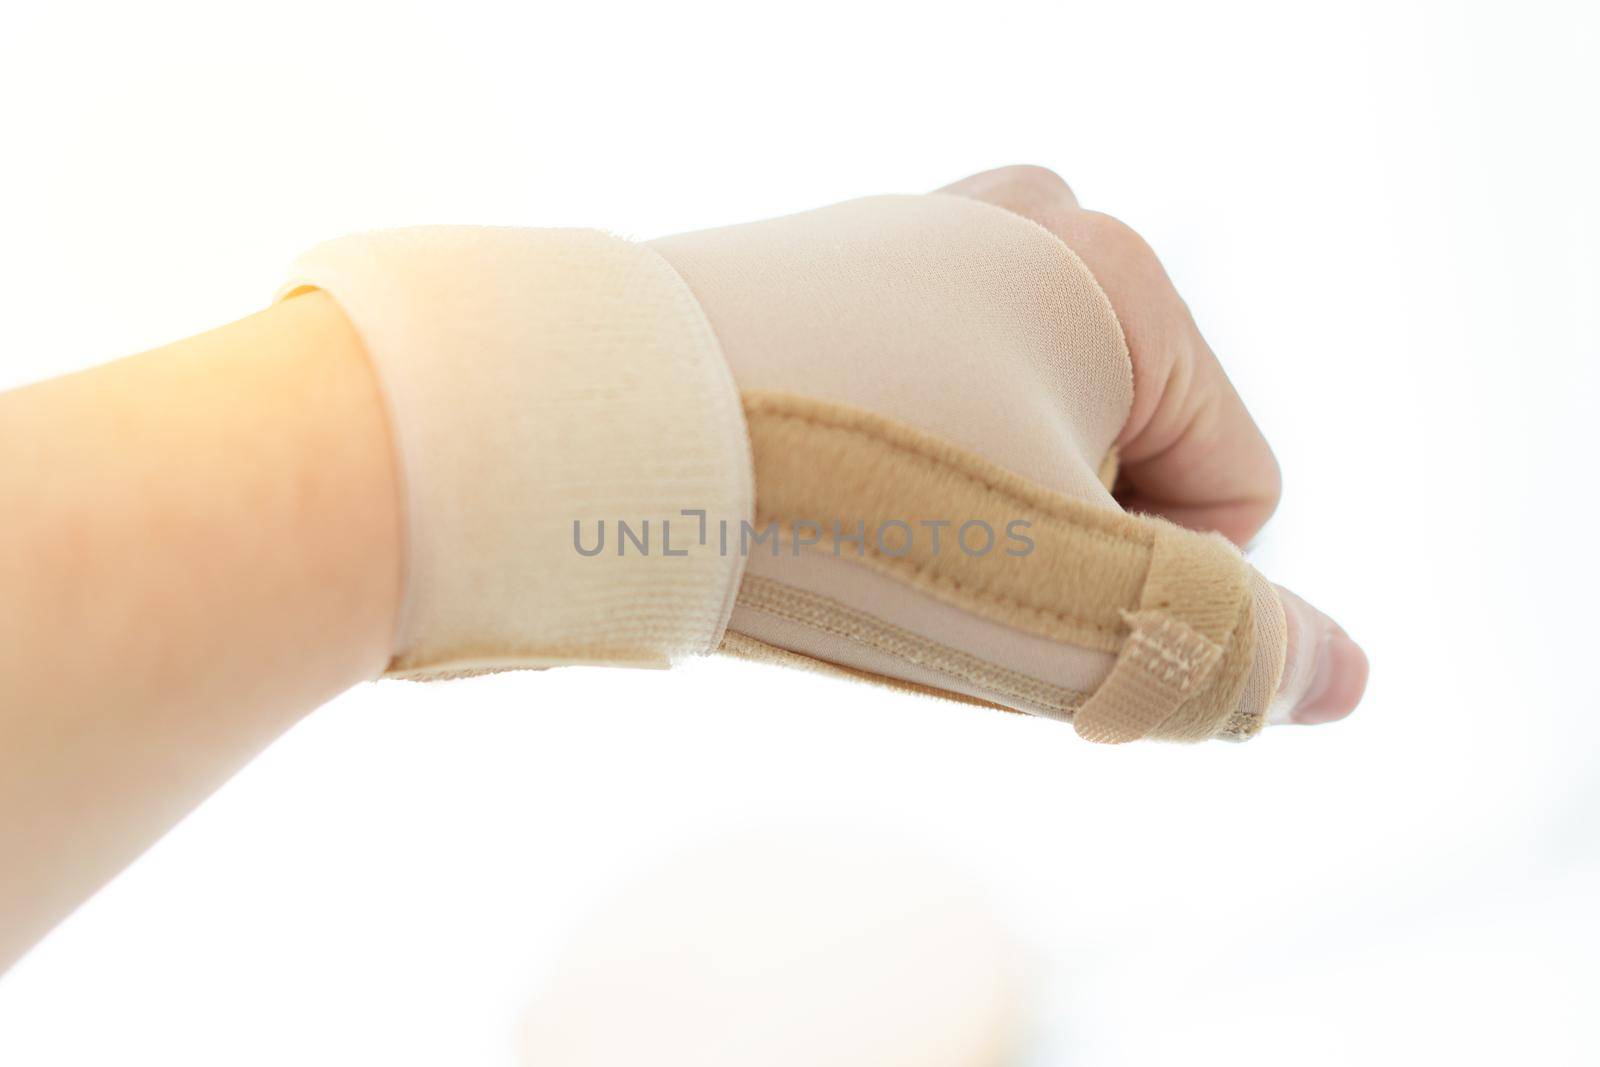 wrist bandage for support arm pain with care show finger like brace in medicine sprain bone by VacharapongW